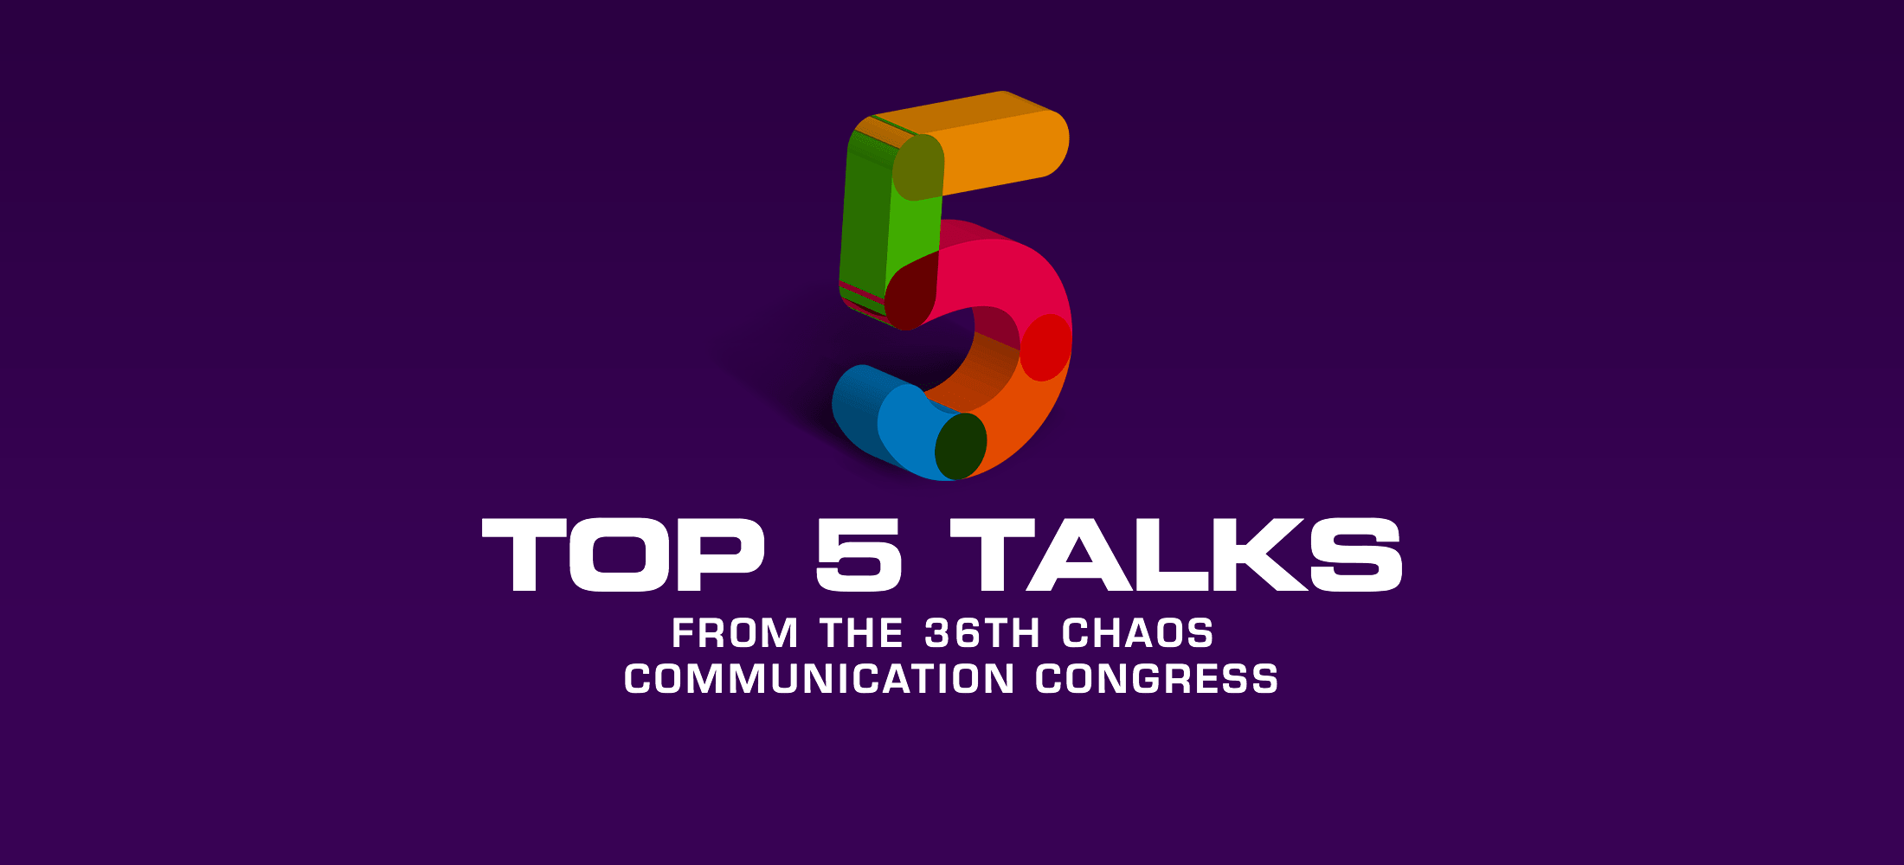 Top 5 Talks from the 36th Chaos Communication Congress.